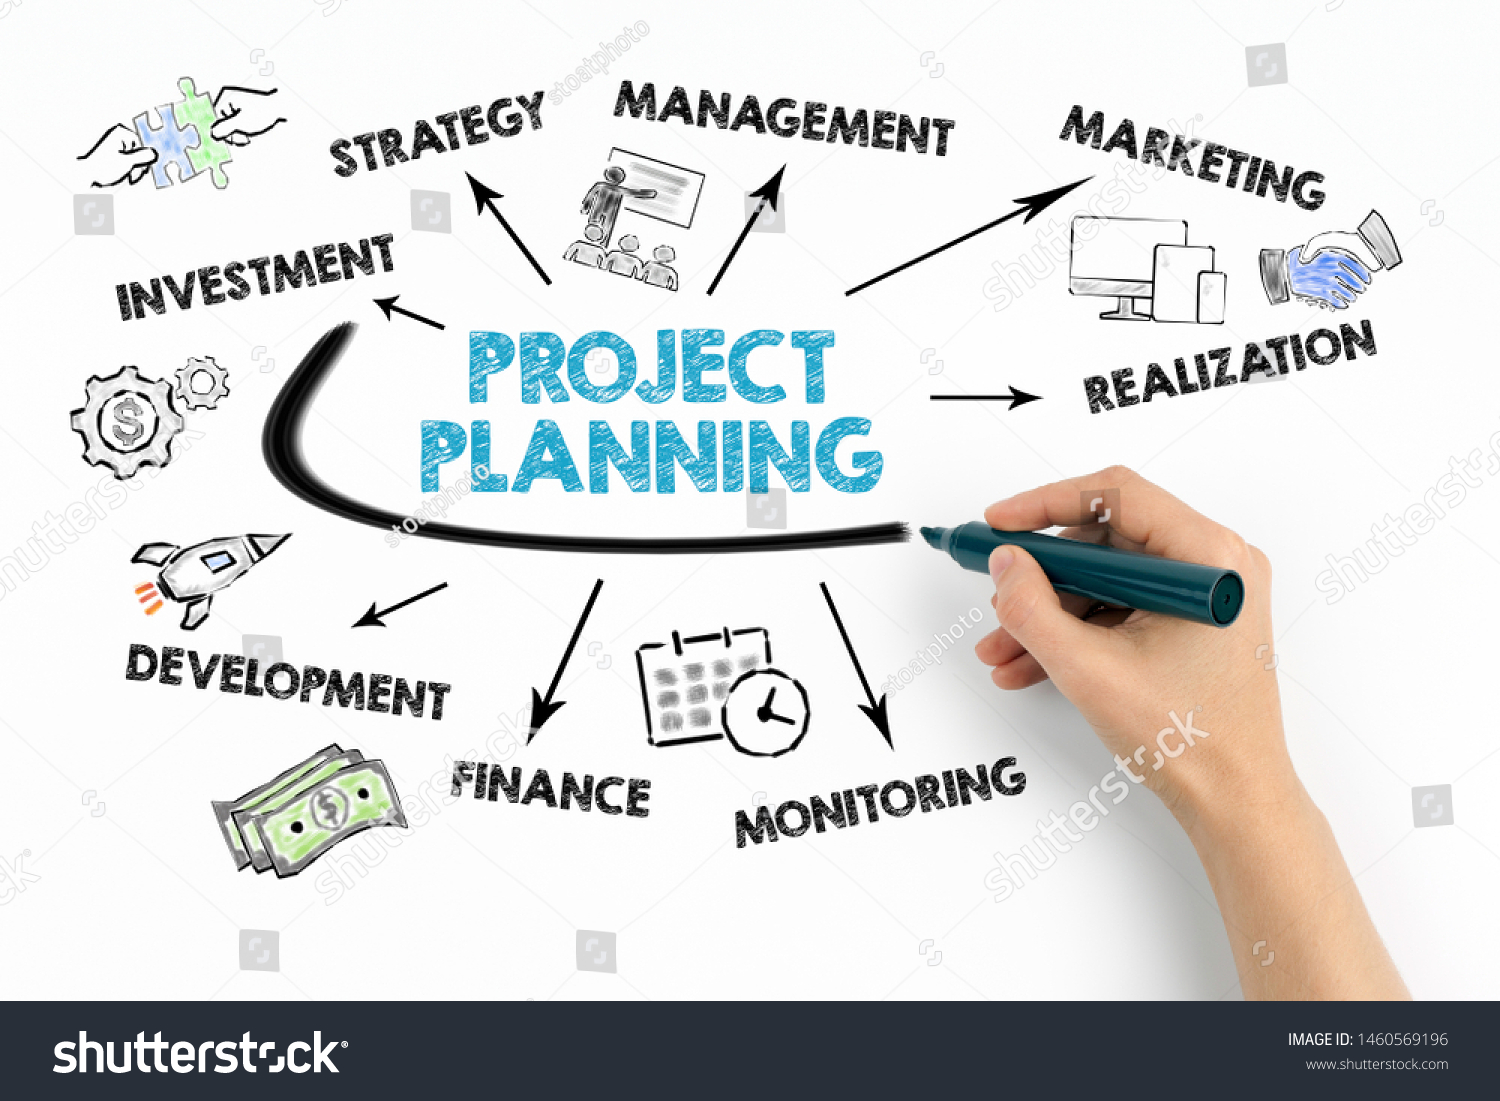 Project Planning Concept Chart Keywords Icons Stock Photo 1460569196 ...